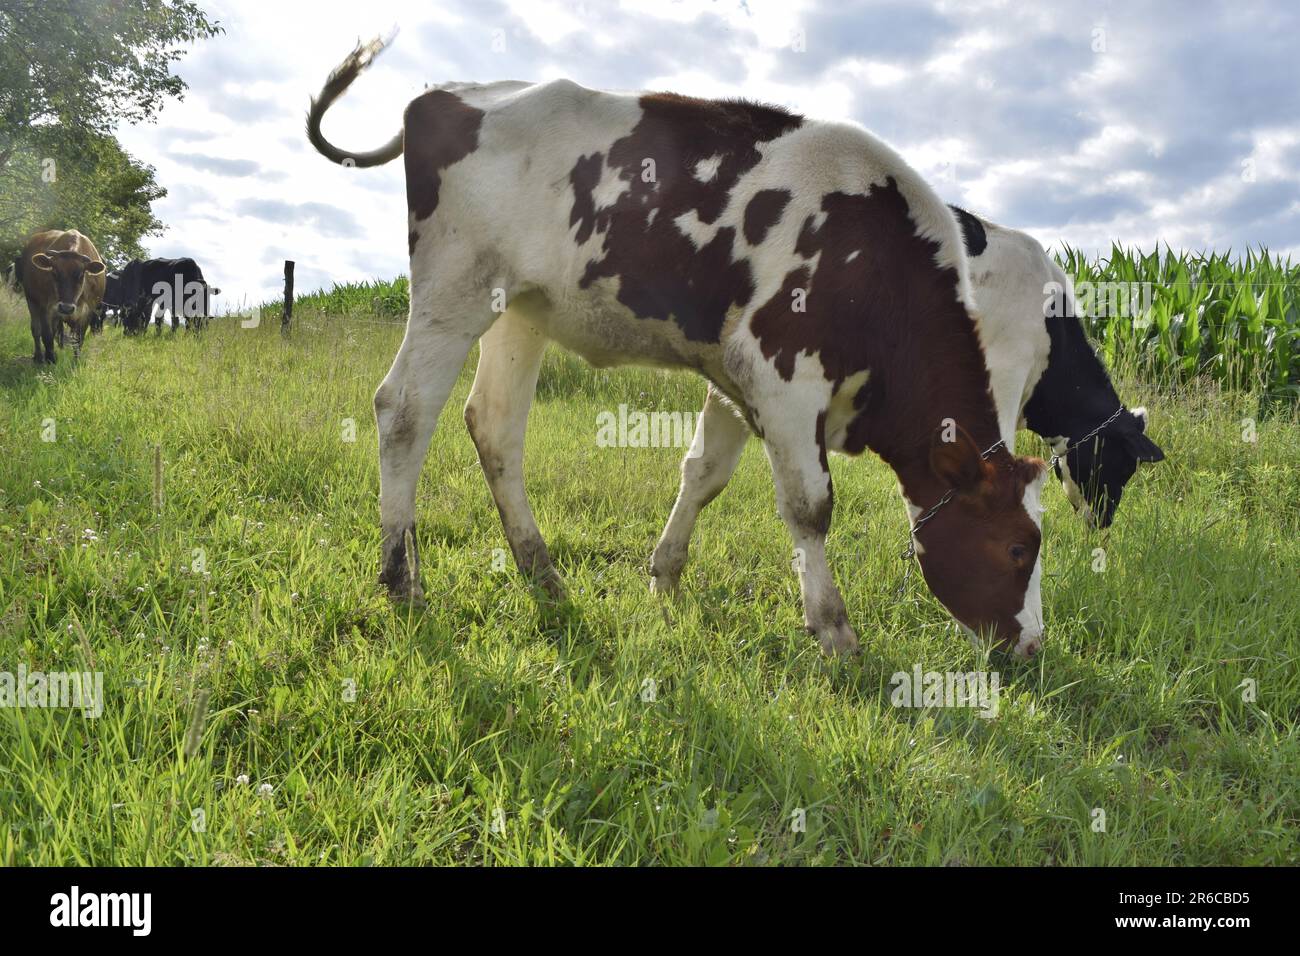 This Image Depicts A Black And White Cow Grazing In A Lush Green Field Stock Photo Alamy